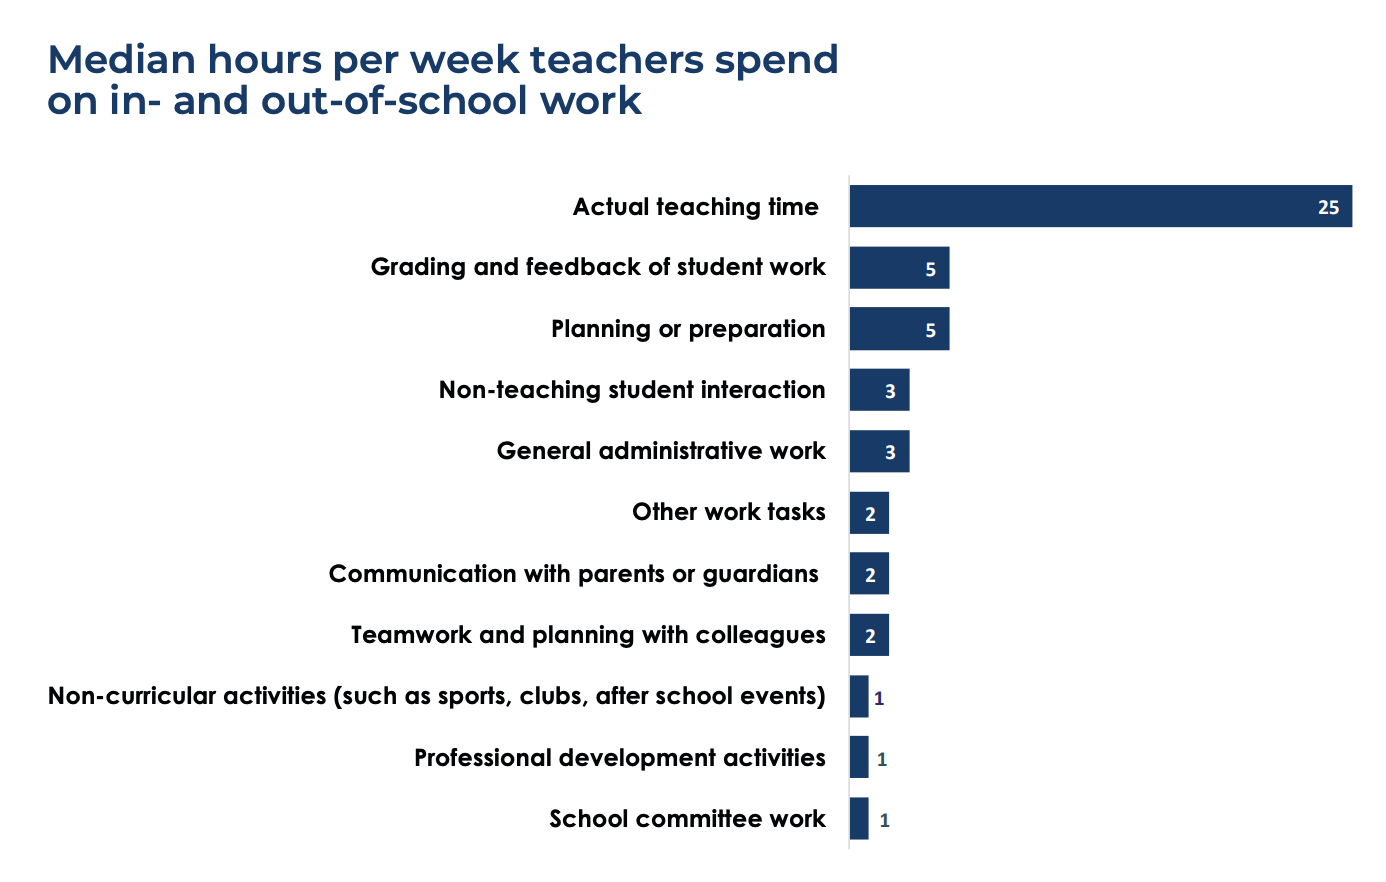 A survey of how teachers spend their in- and out-of-school work time. The top three items are actual teaching time, grading and feedback of student work, and planning or preparation.